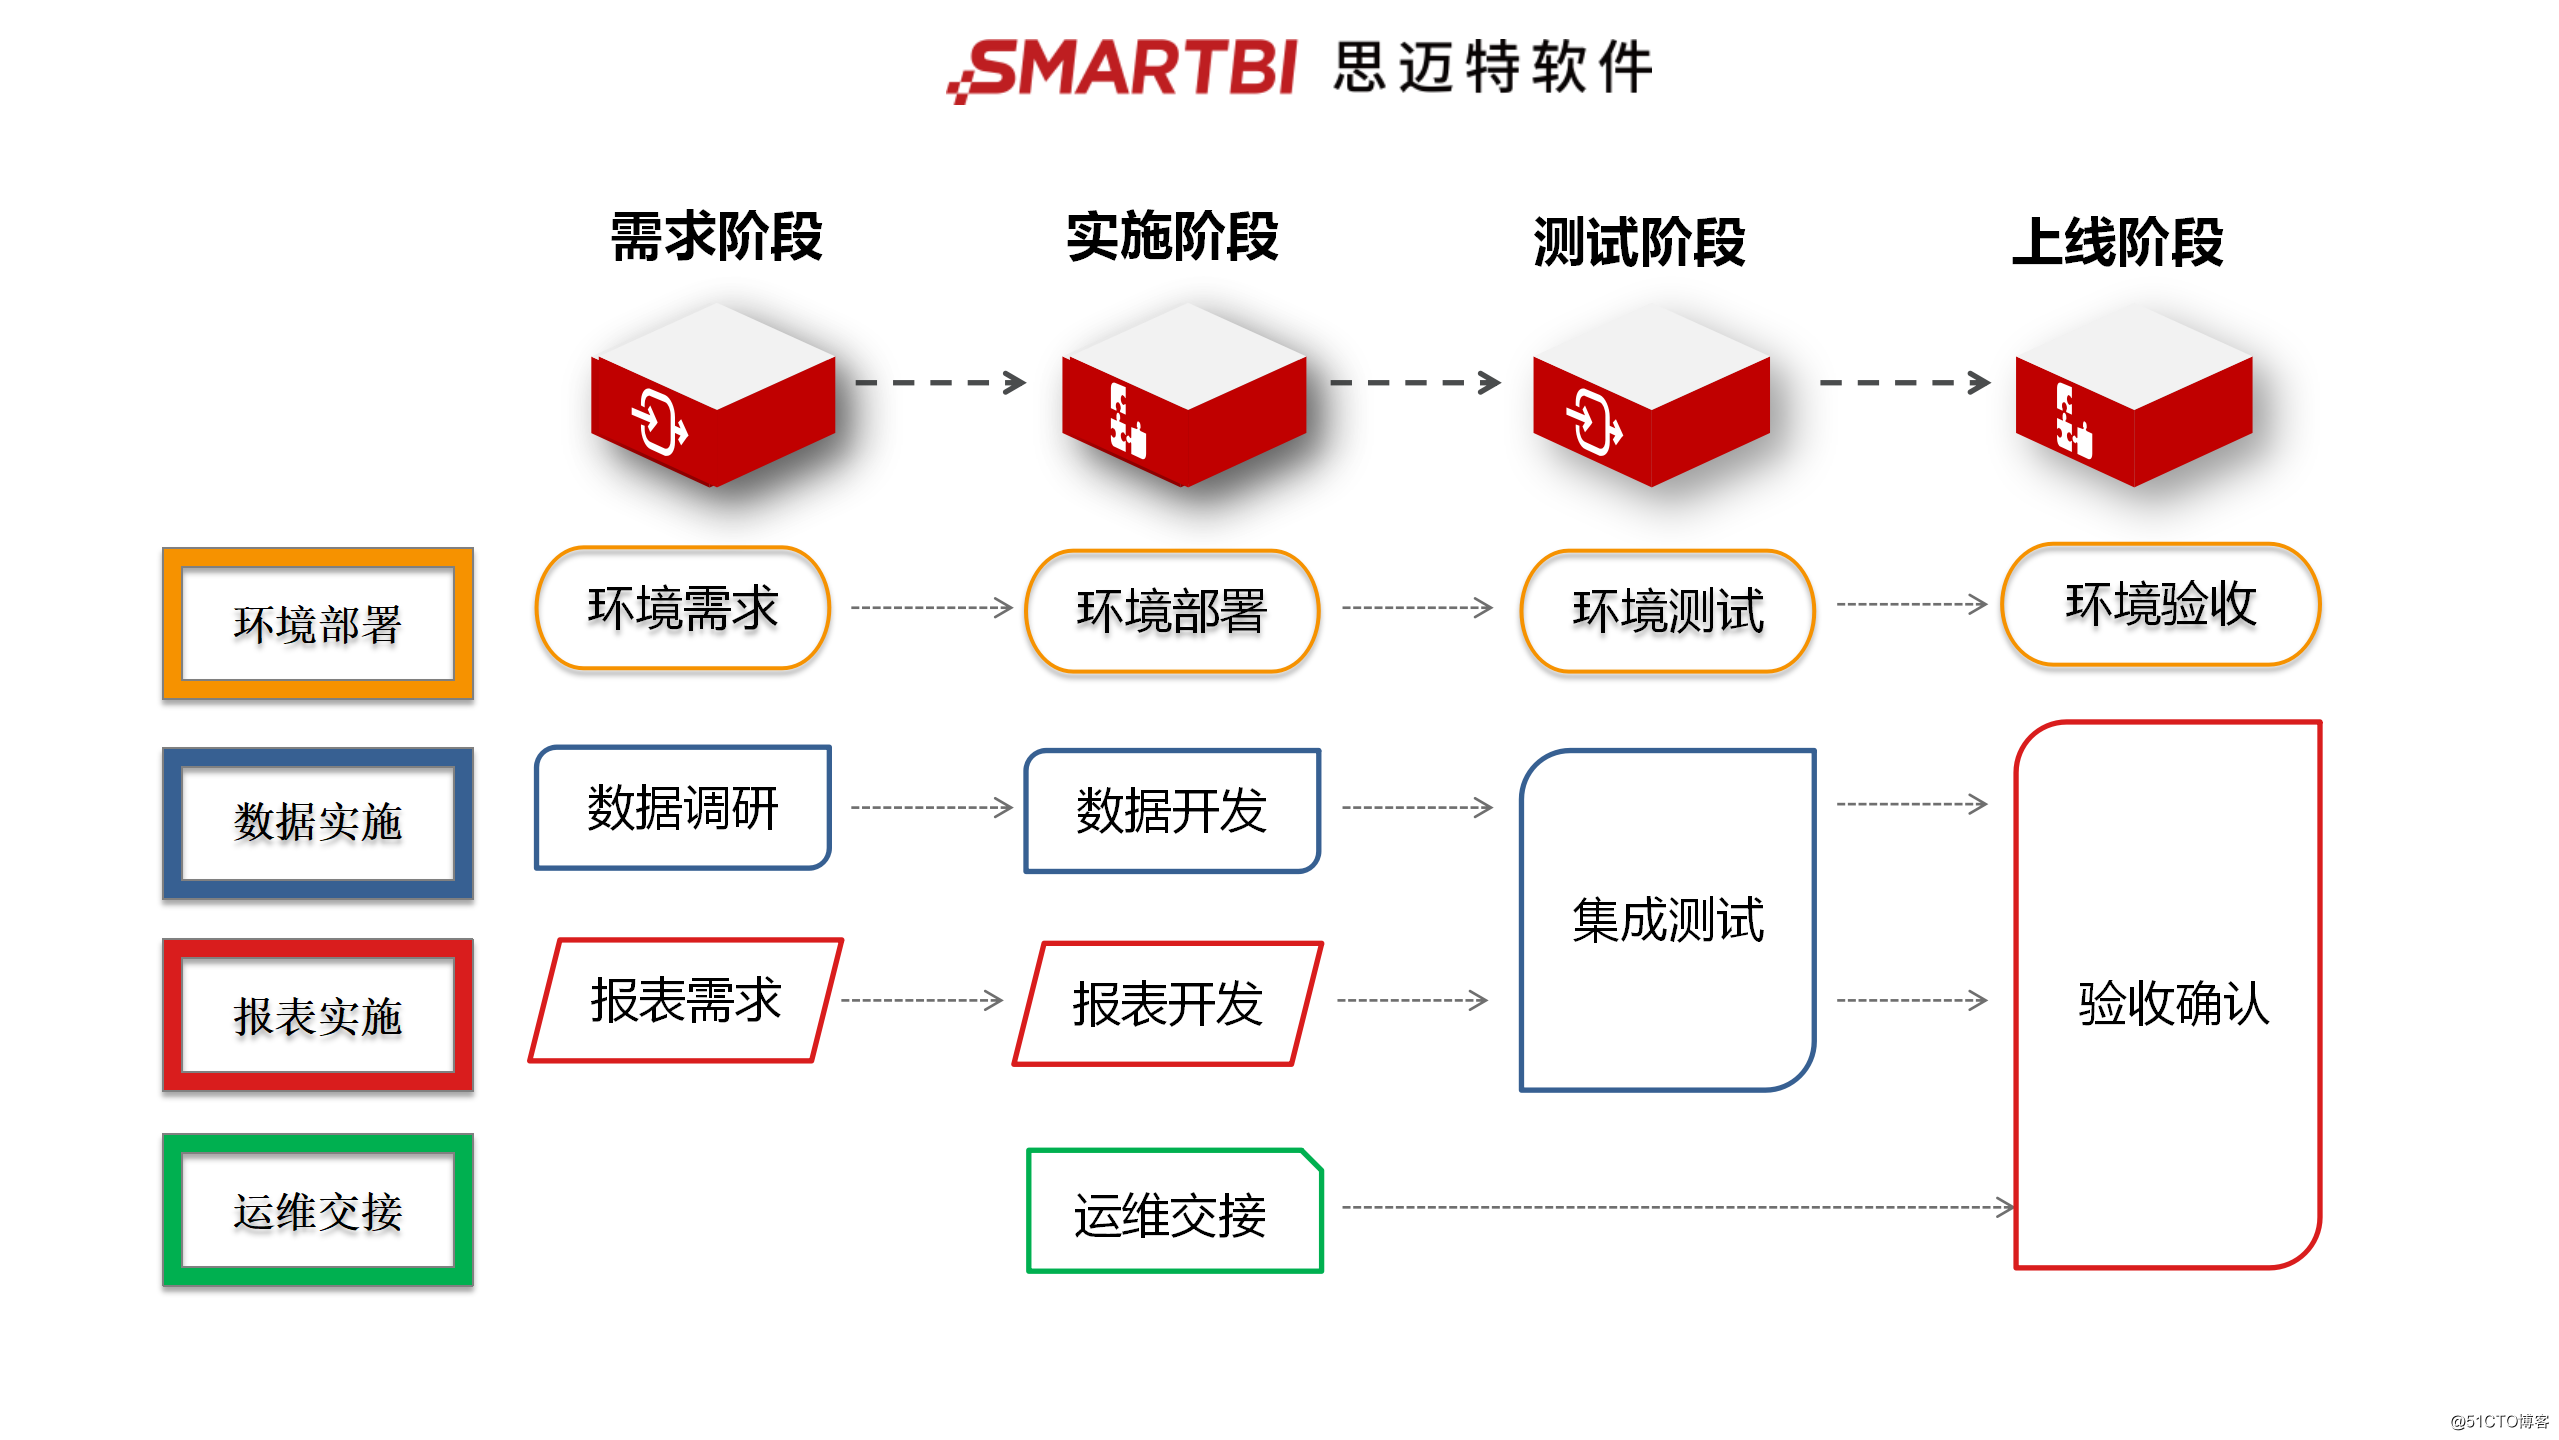 How to report platform from 0-1 building?  Smartbi with vernacular tell you clearly, not fast collection!